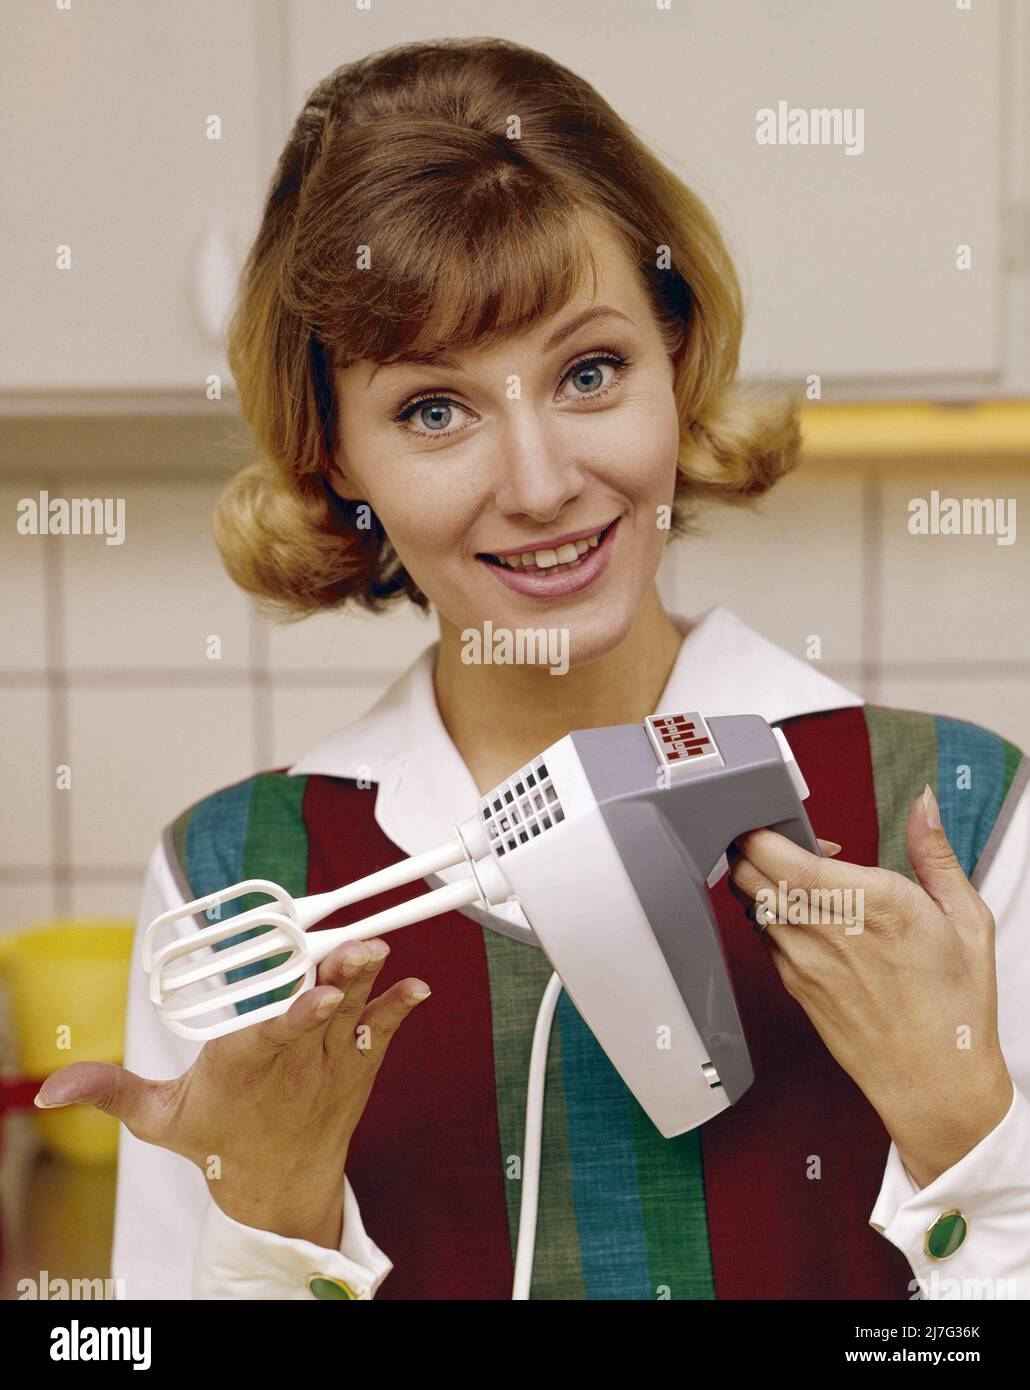 In the 1960s. A young woman pictured in the kitchen using an electric hand mixer. Stock Photo